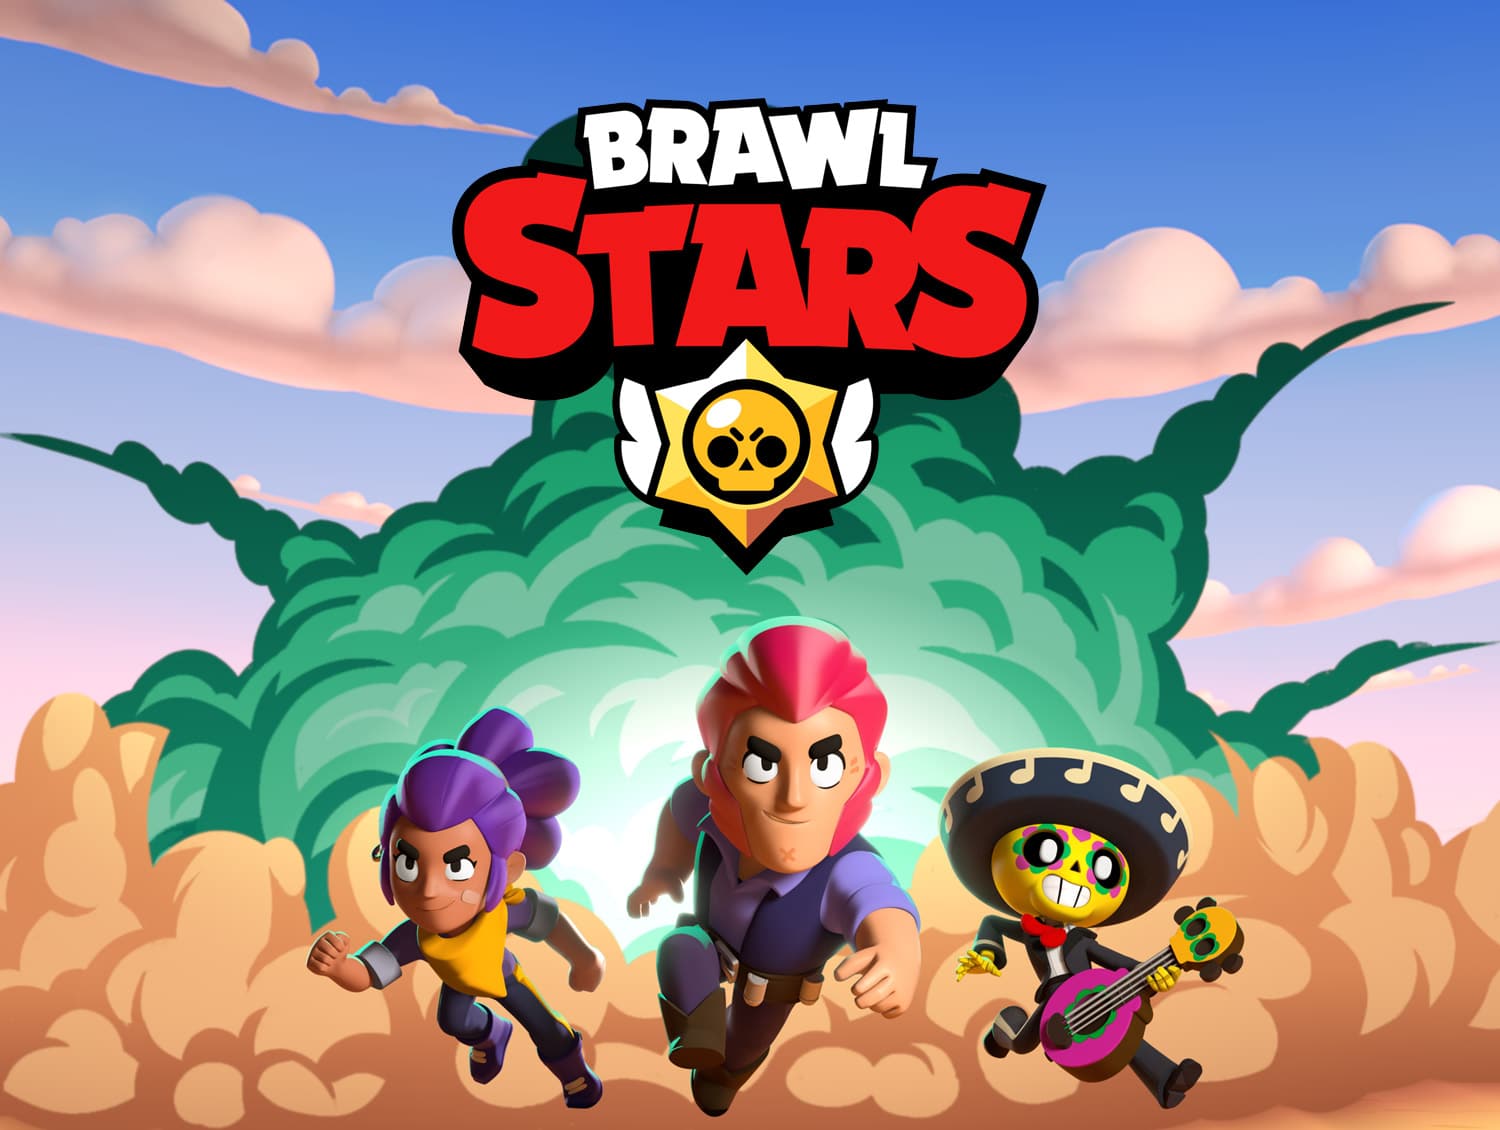 Unleash Your Brawl Stars Potential with these Comfortable Brawlers